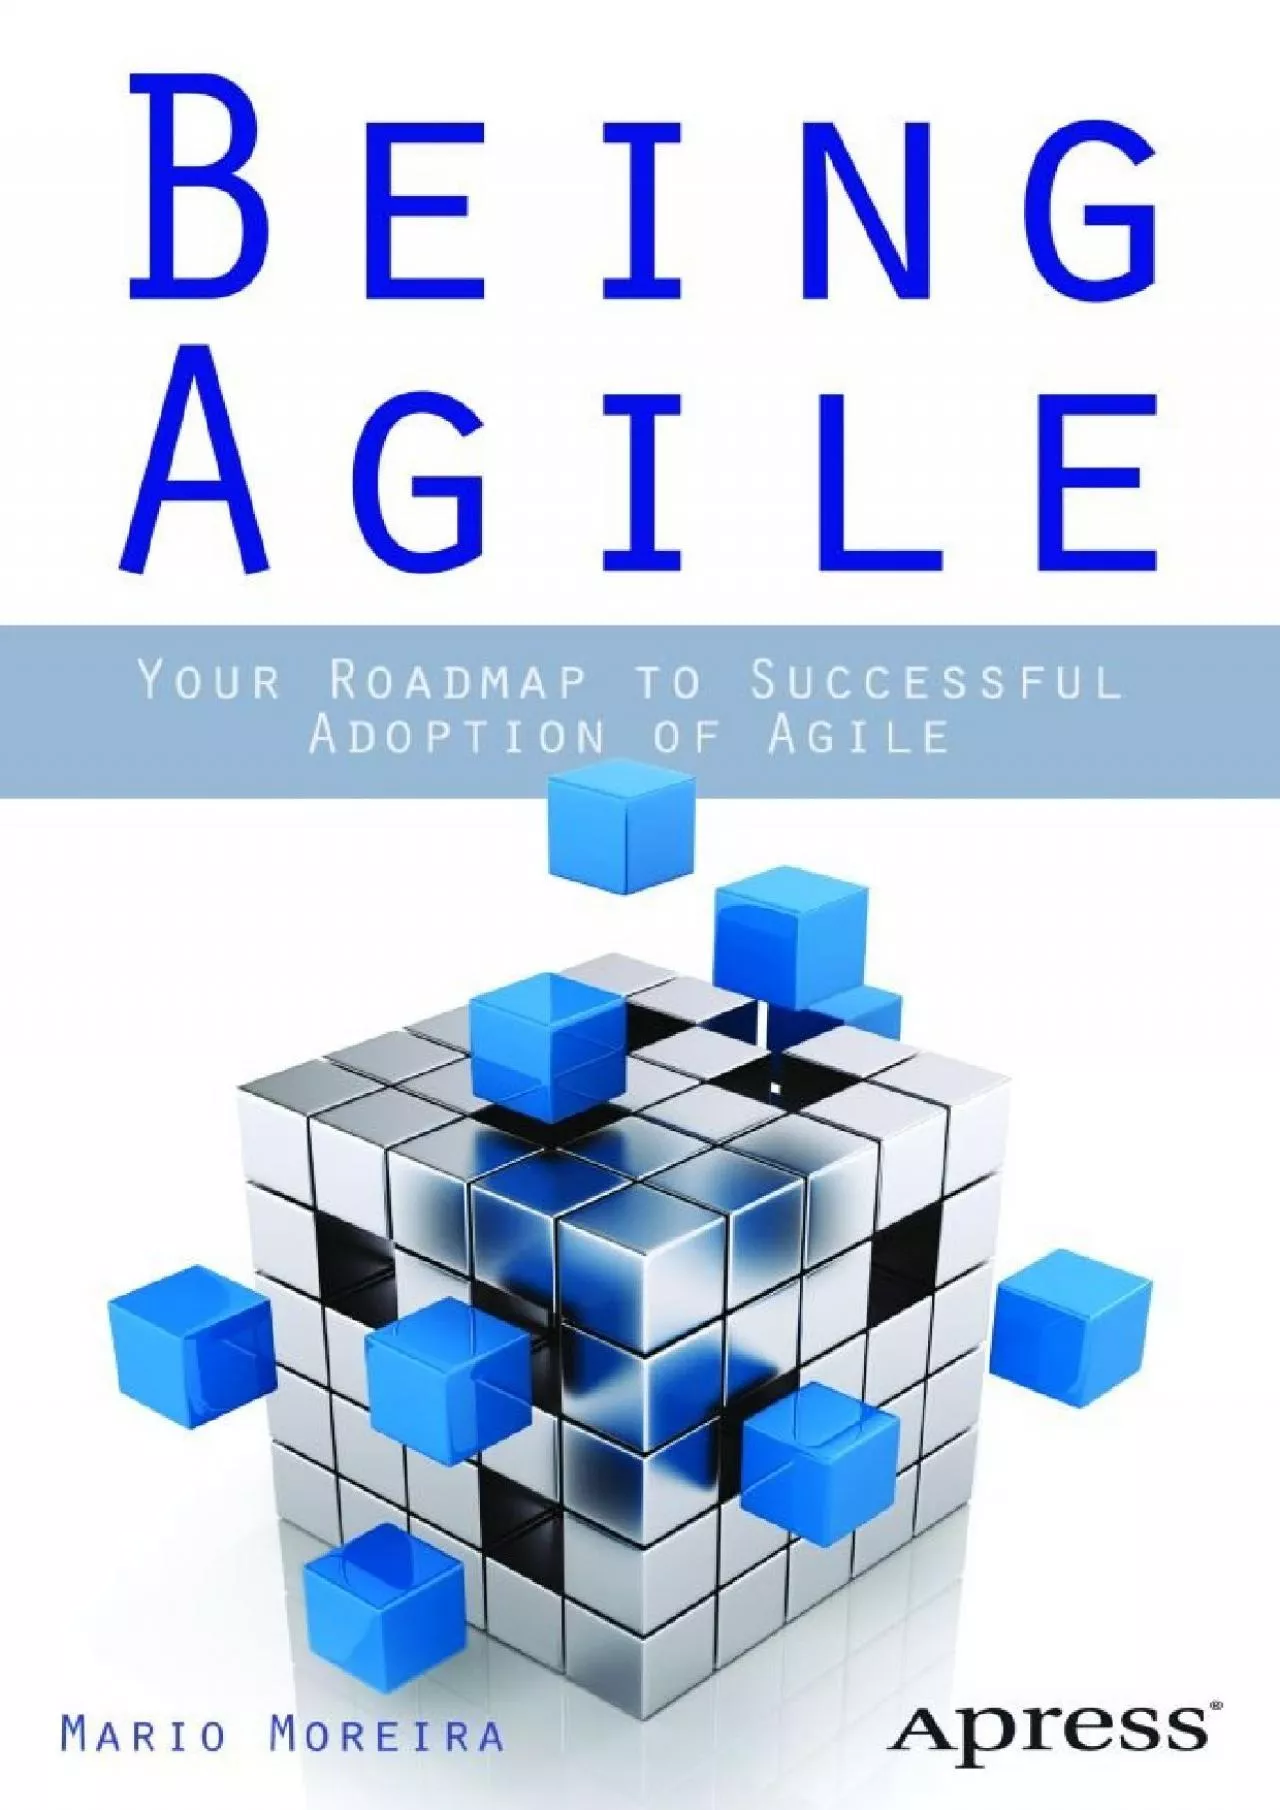 [FREE]-Being Agile: Your Roadmap to Successful Adoption of Agile